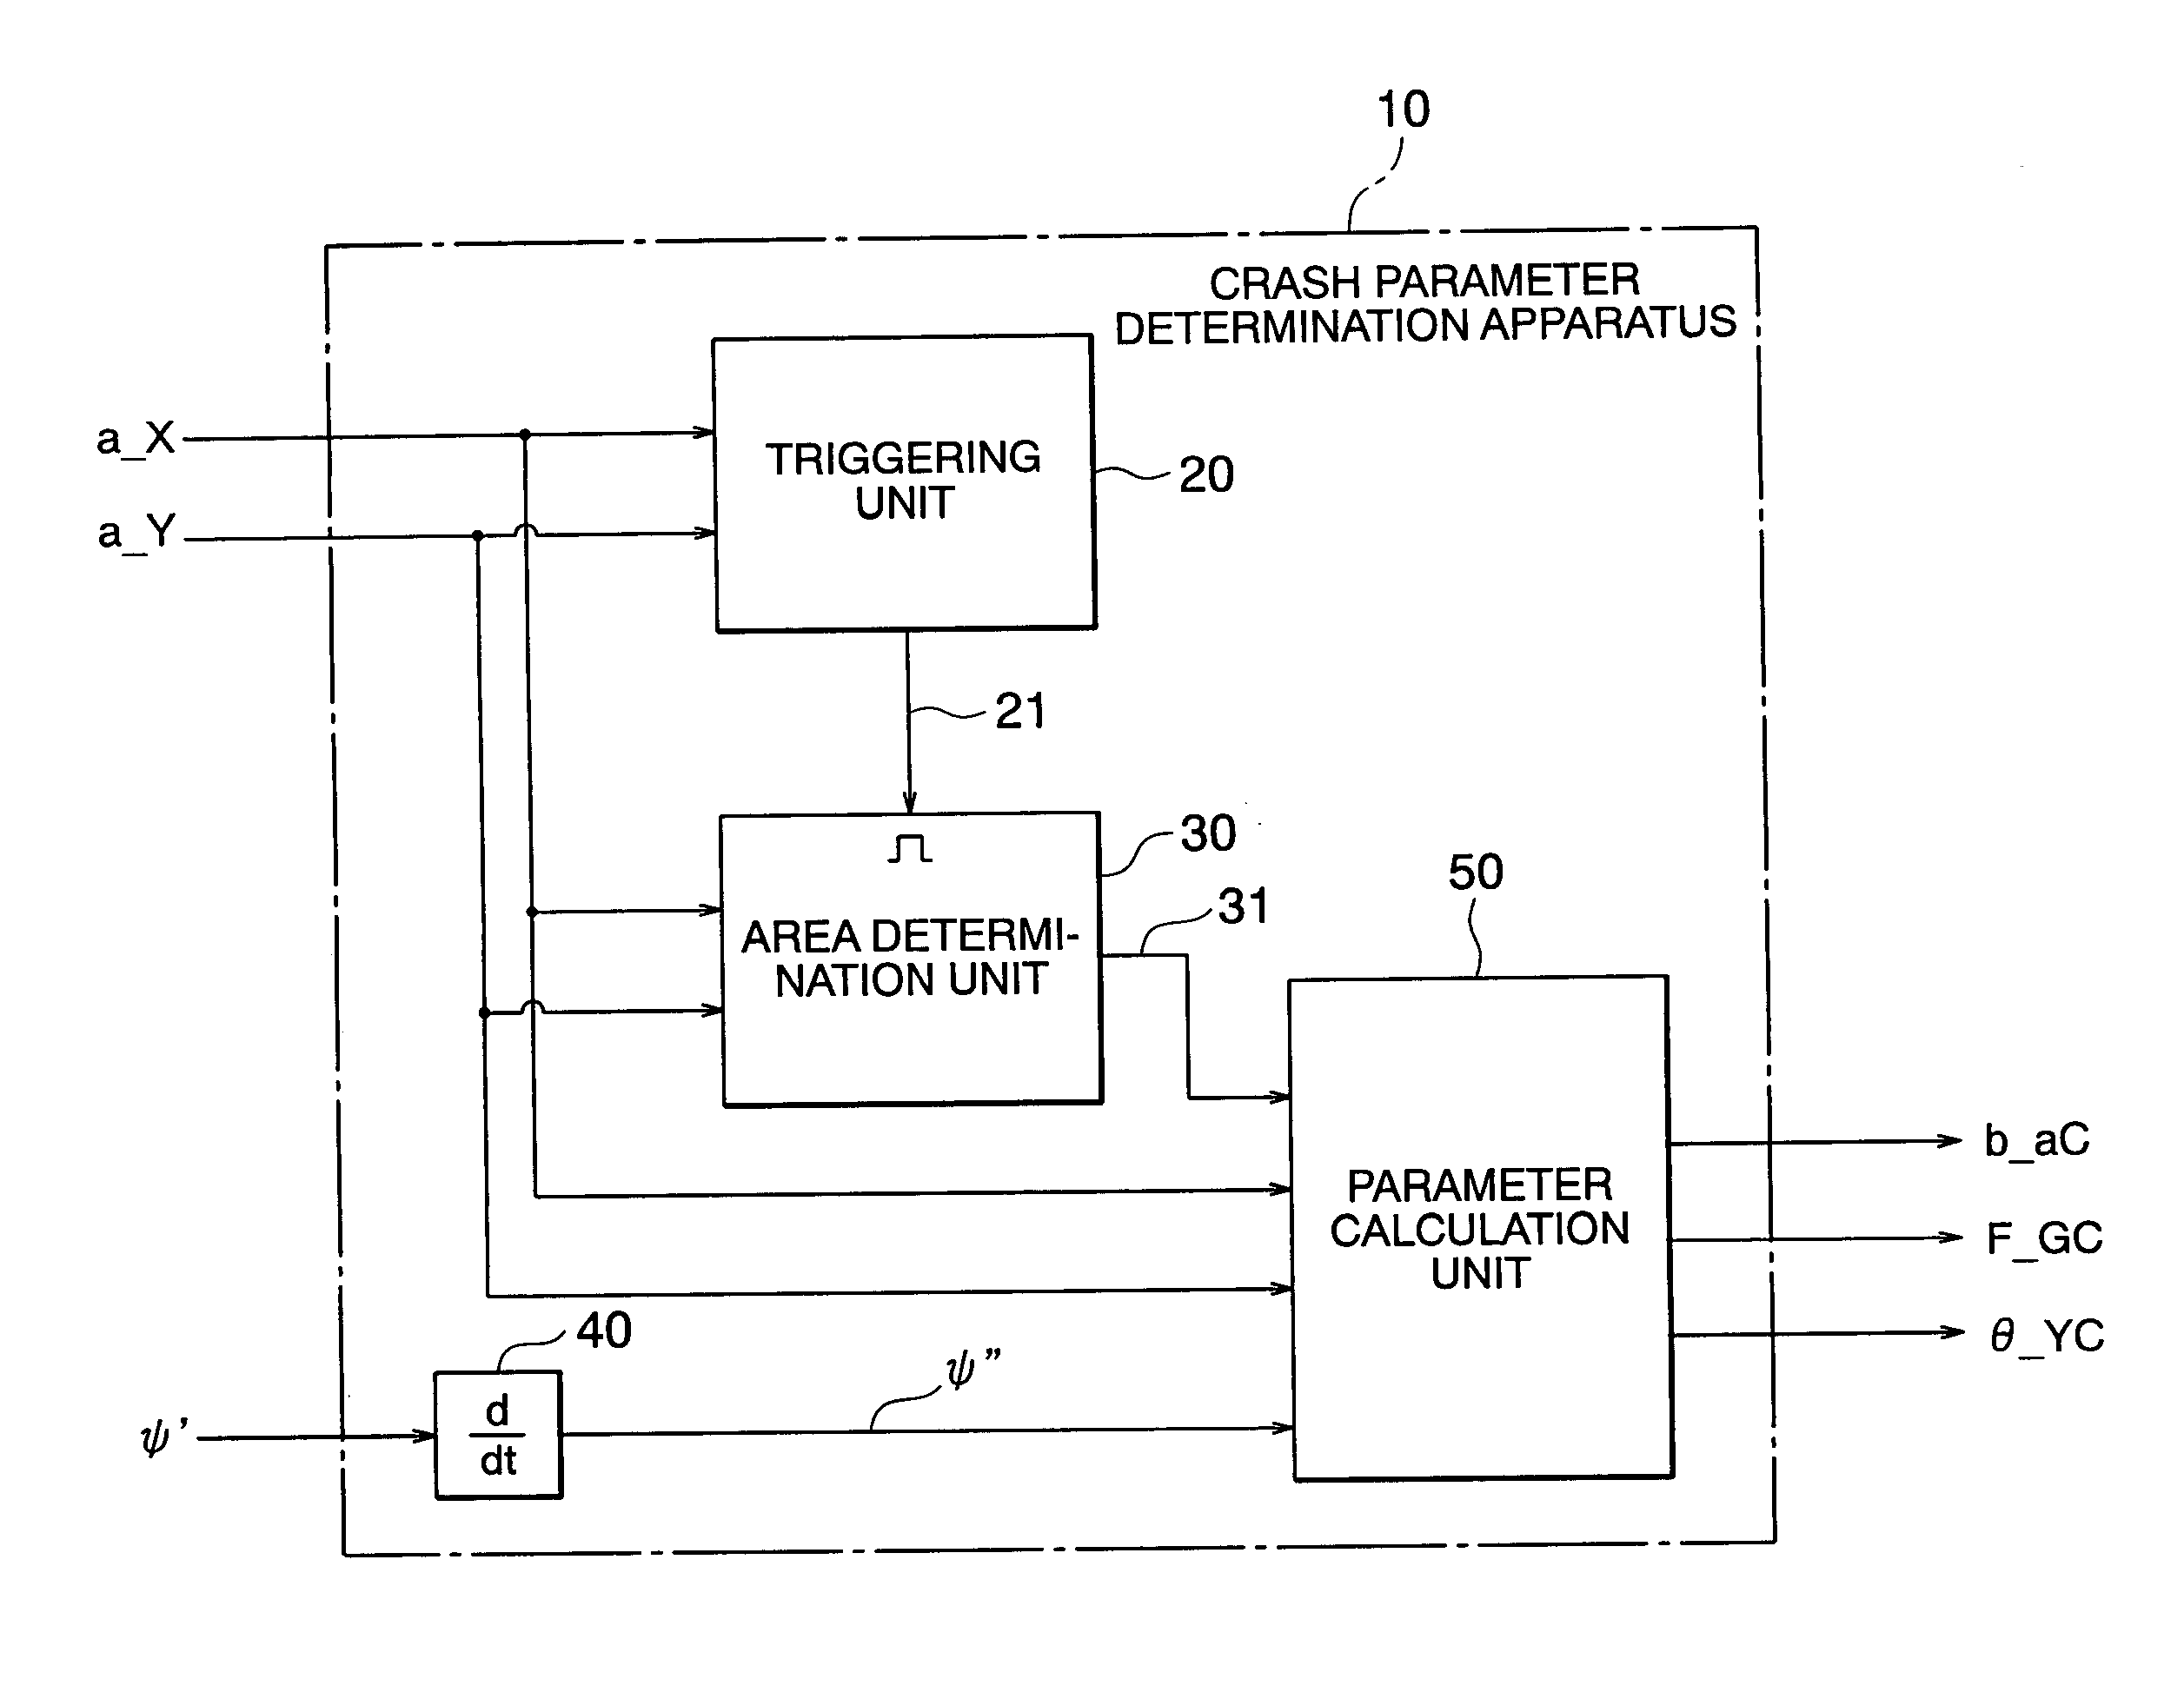 Vehicle accident analyzing apparatus